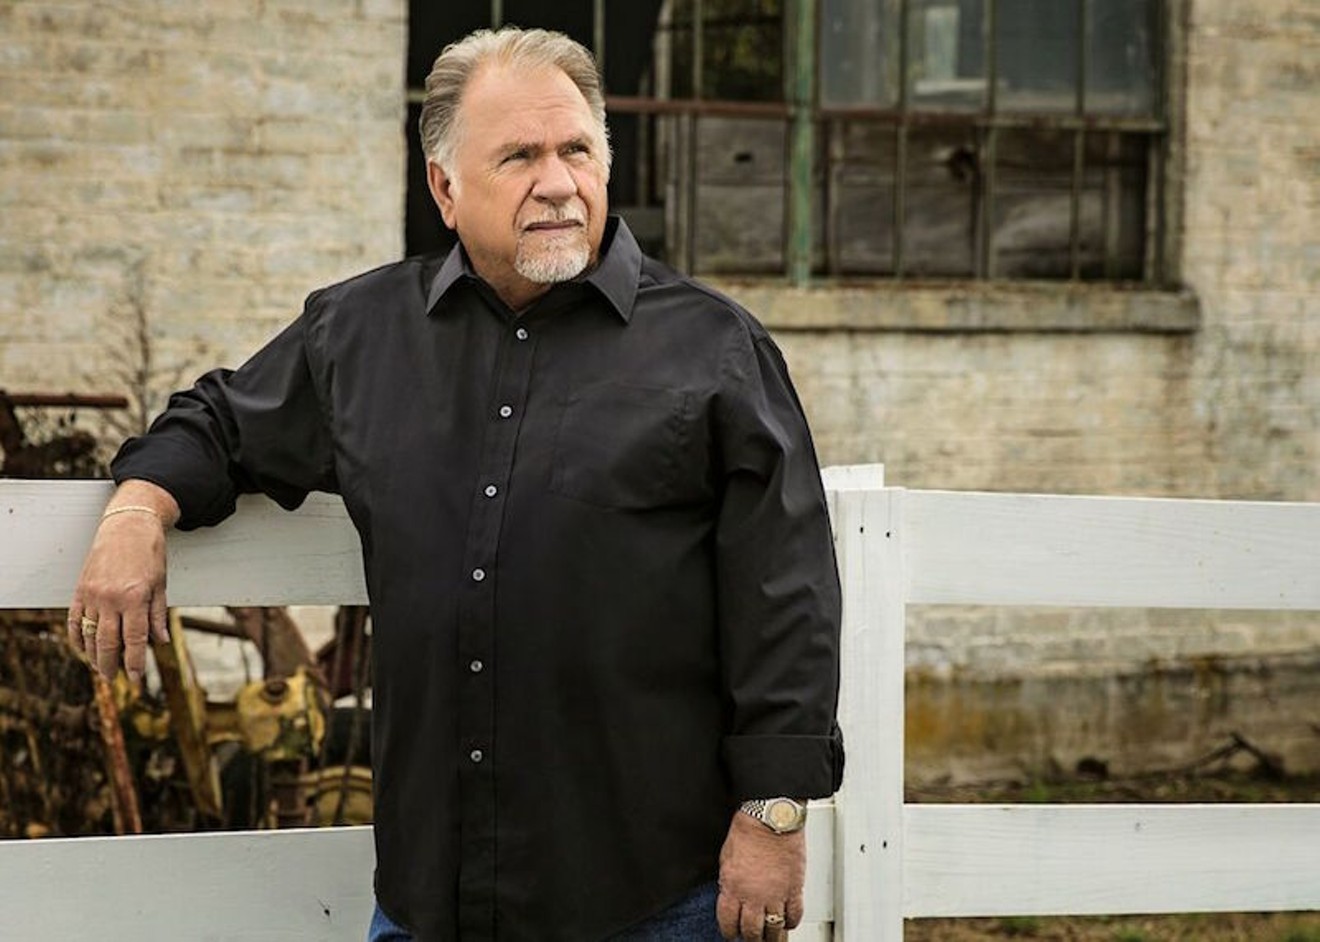 Gene Watson, member of the Grand Ole Opry, Texas Music Hall of Fame and Houston Music Hall of Fame.